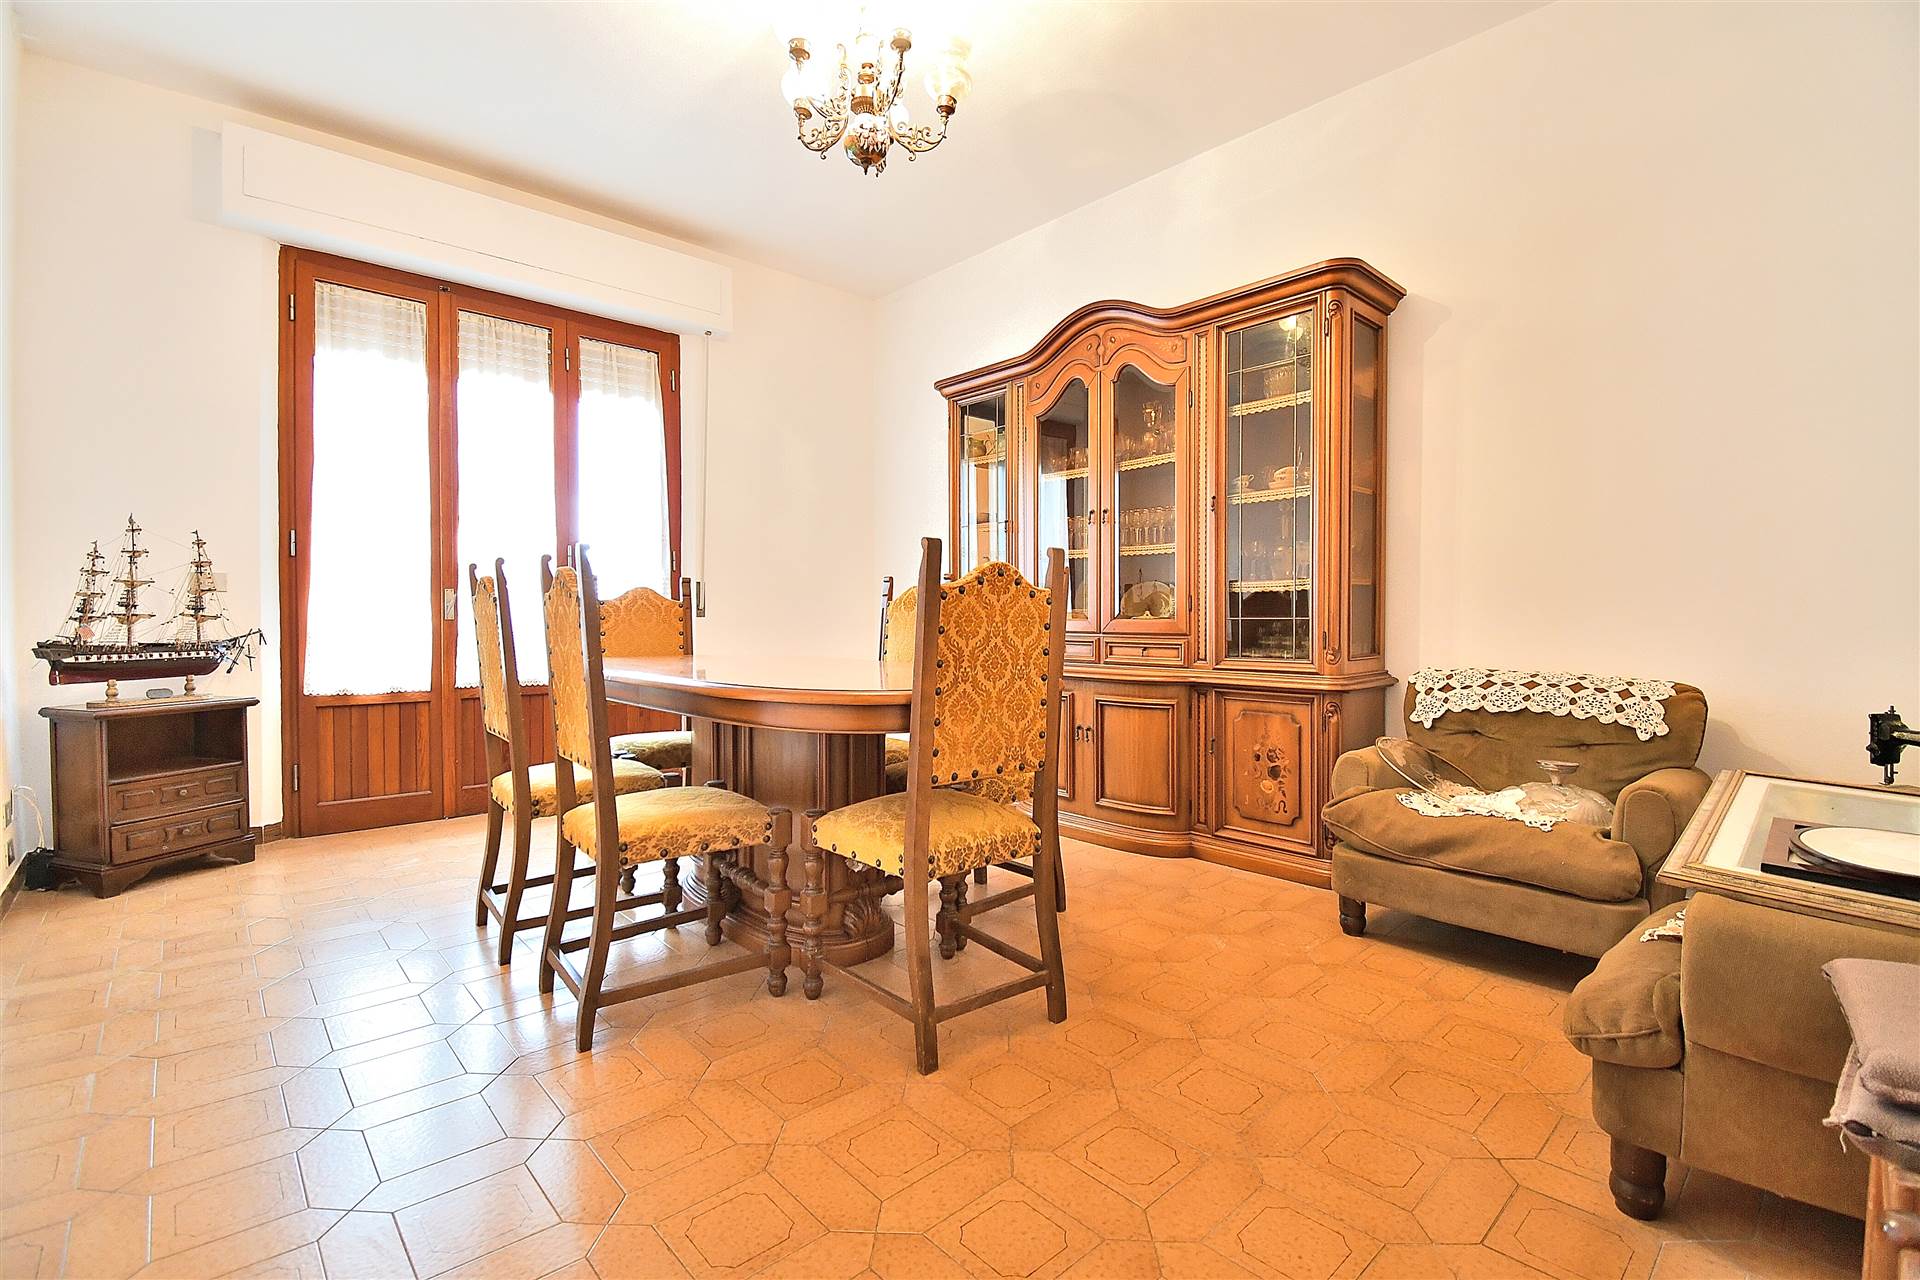 CASTELNUOVO BERARDENGA, Apartment for sale of 154 Sq. mt., Habitable, Heating Individual heating system, Energetic class: G, Epi: 175 kwh/m2 year, 